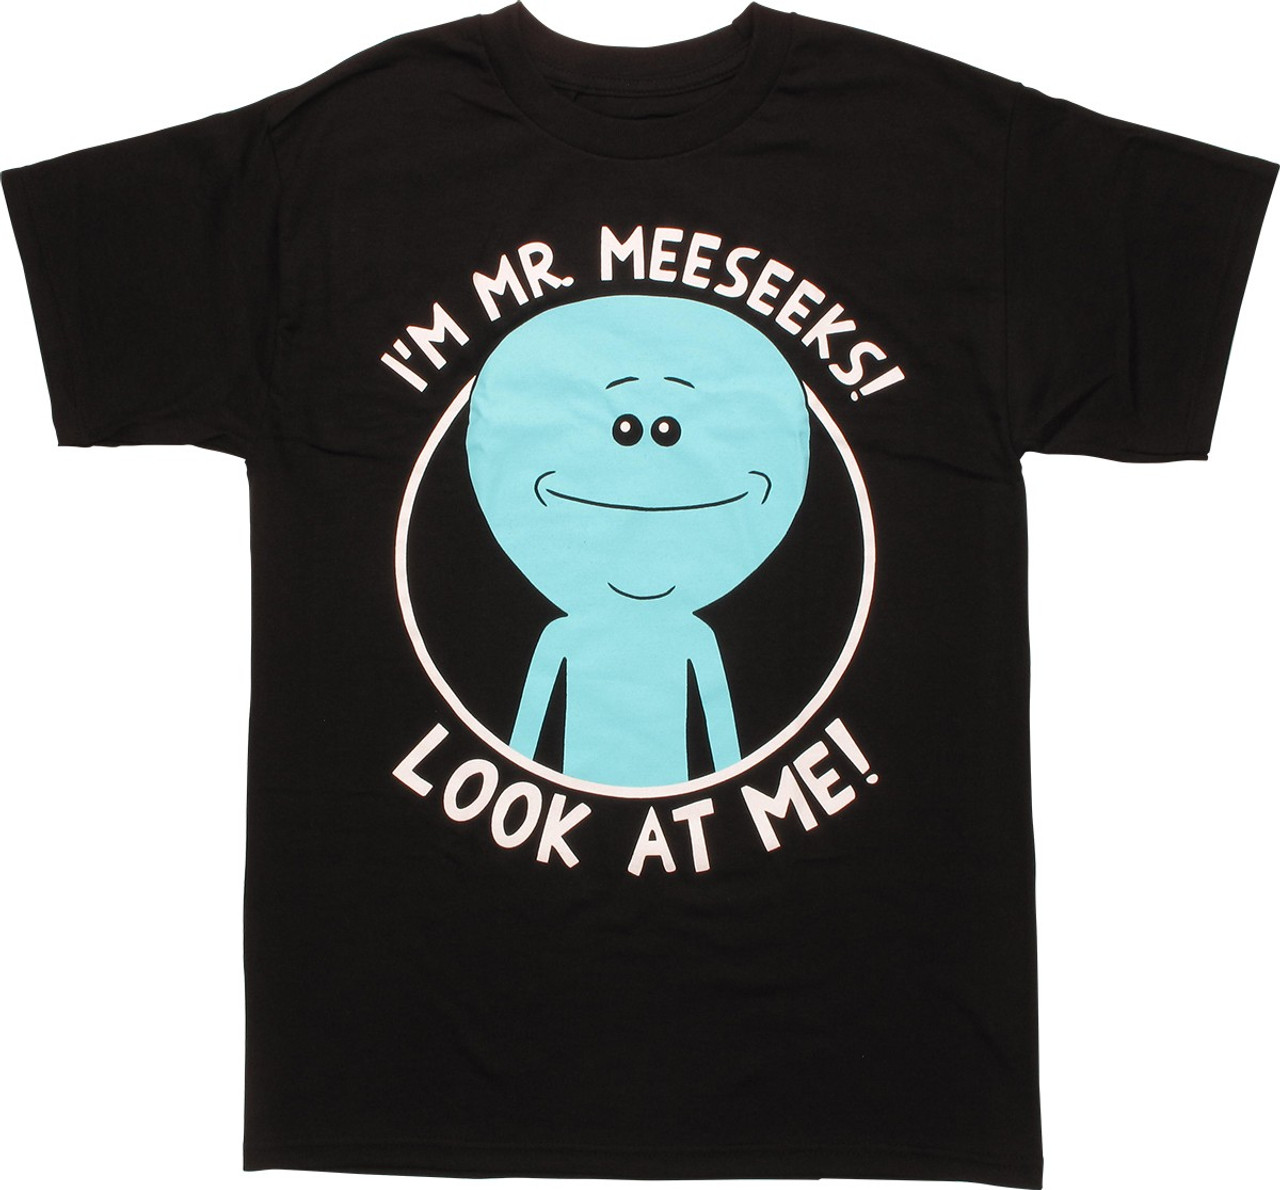 https://cdn11.bigcommerce.com/s-kjvm95bh8i/images/stencil/1280x1280/products/70941/110148/rick-and-morty-mr-meeseeks-look-at-me-t-shirt-9__61263.1512312505.jpg?c=2